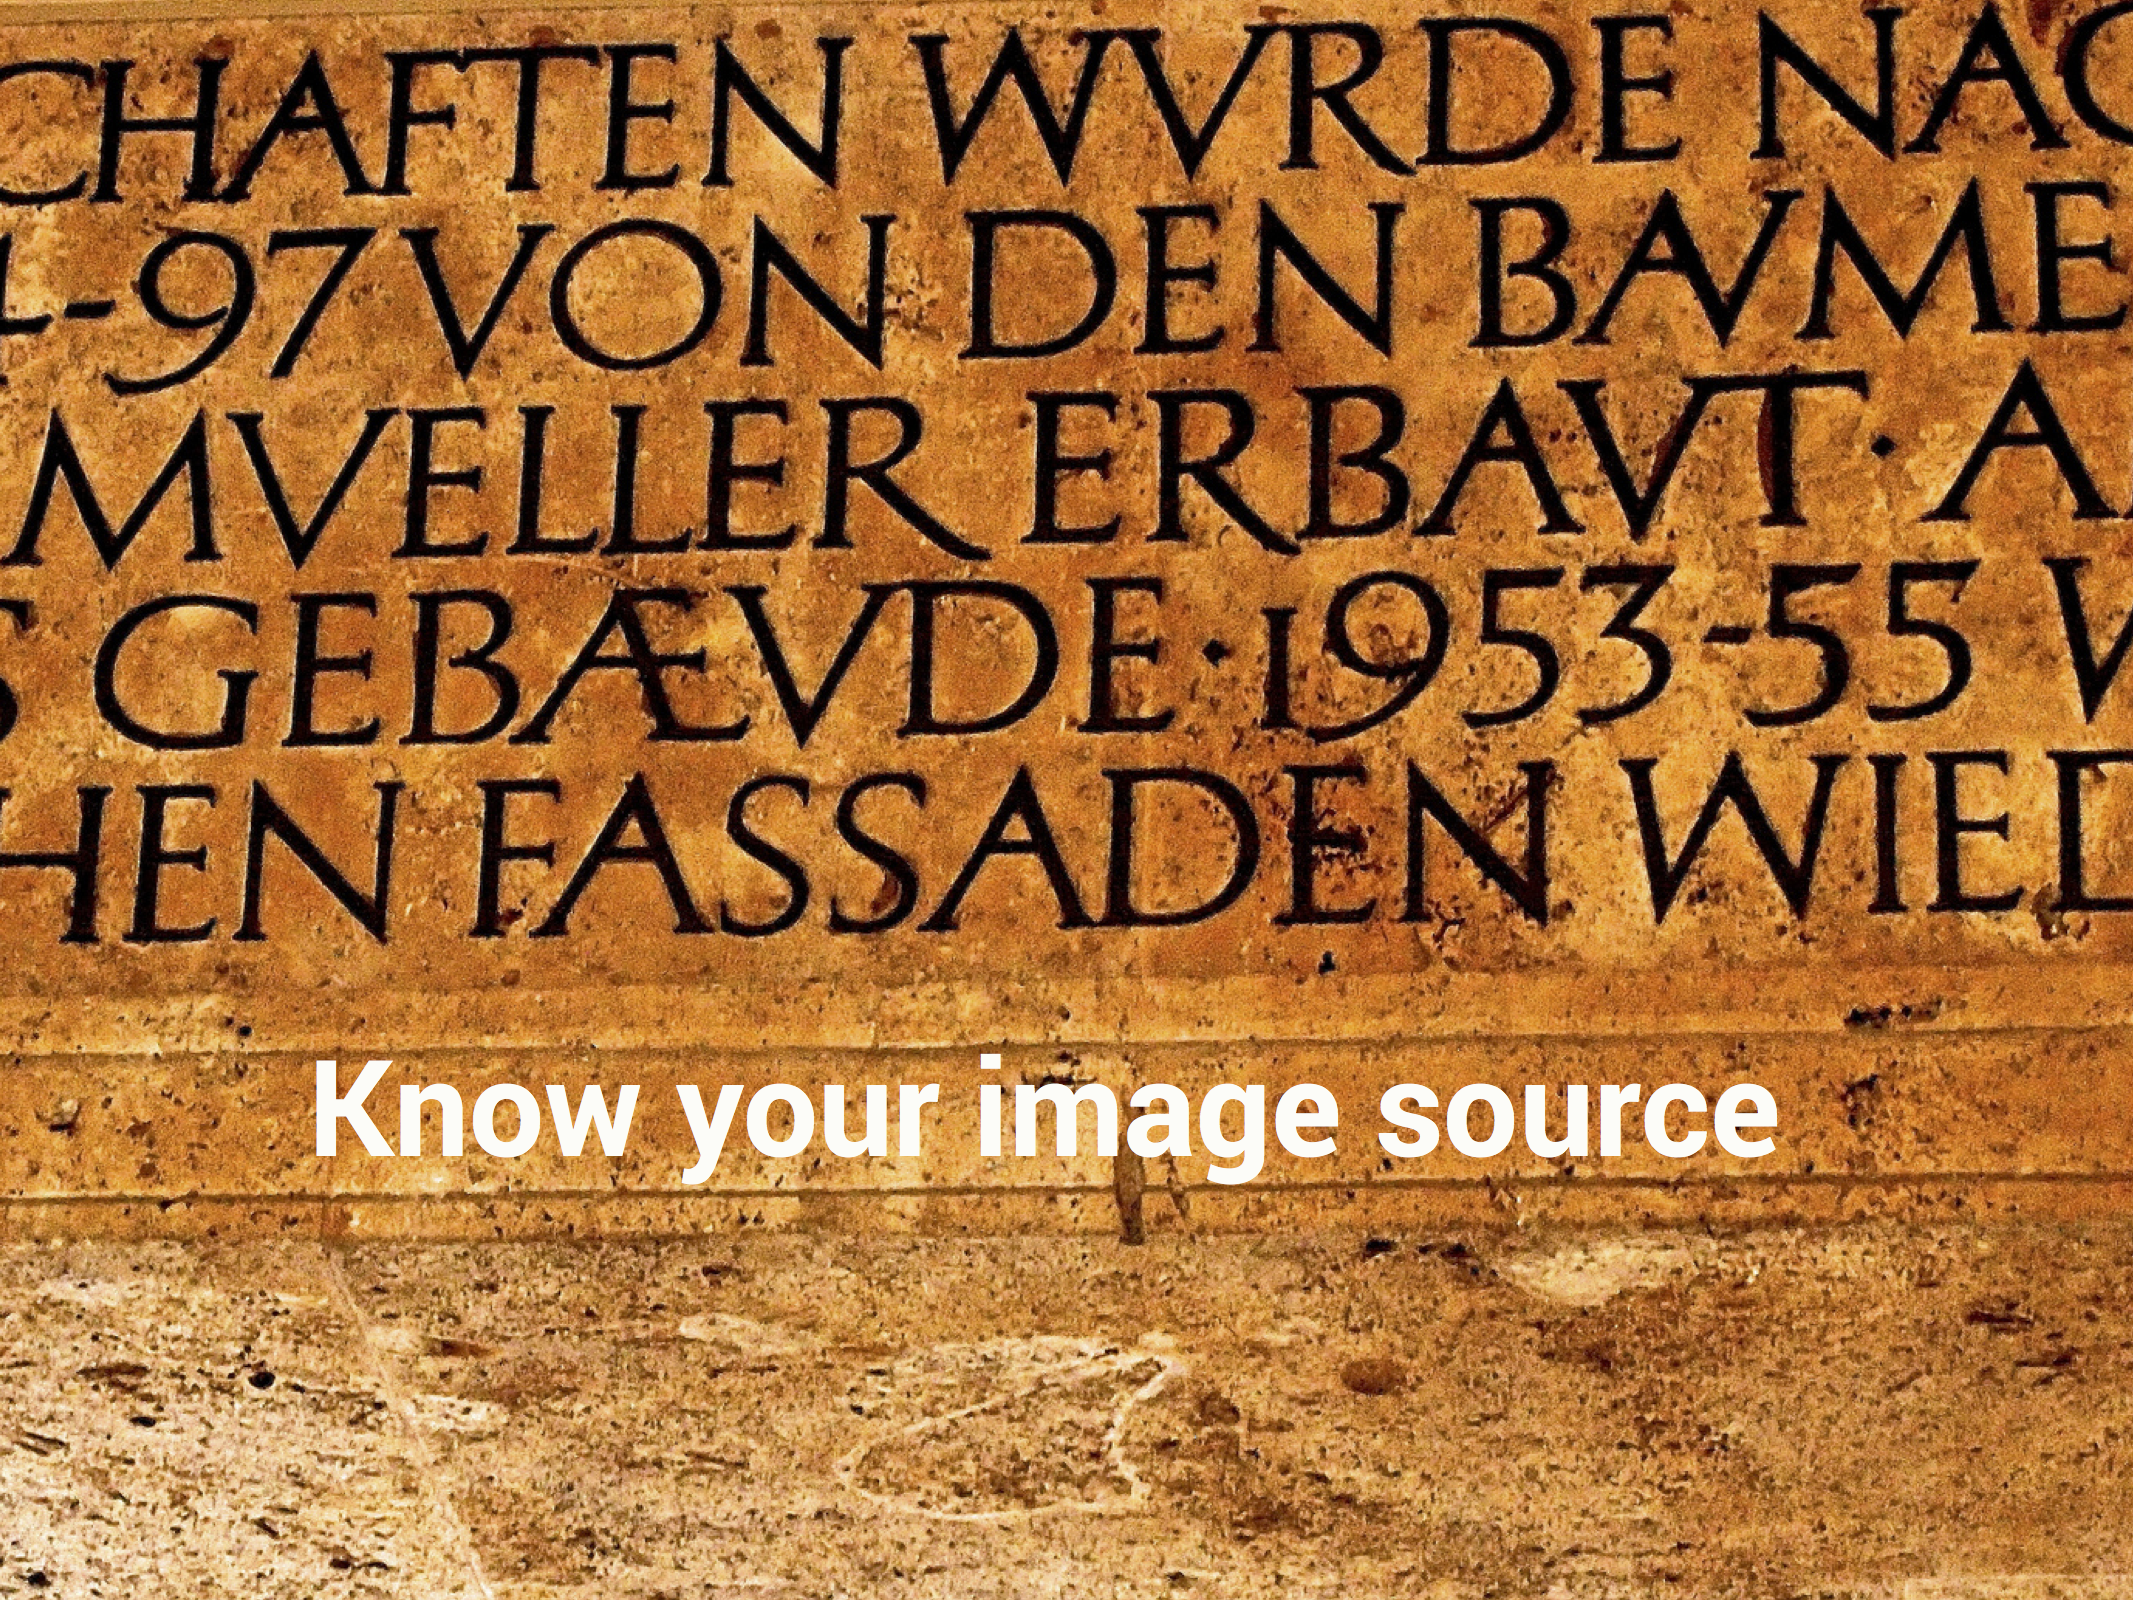 Example of Know Your Image Source